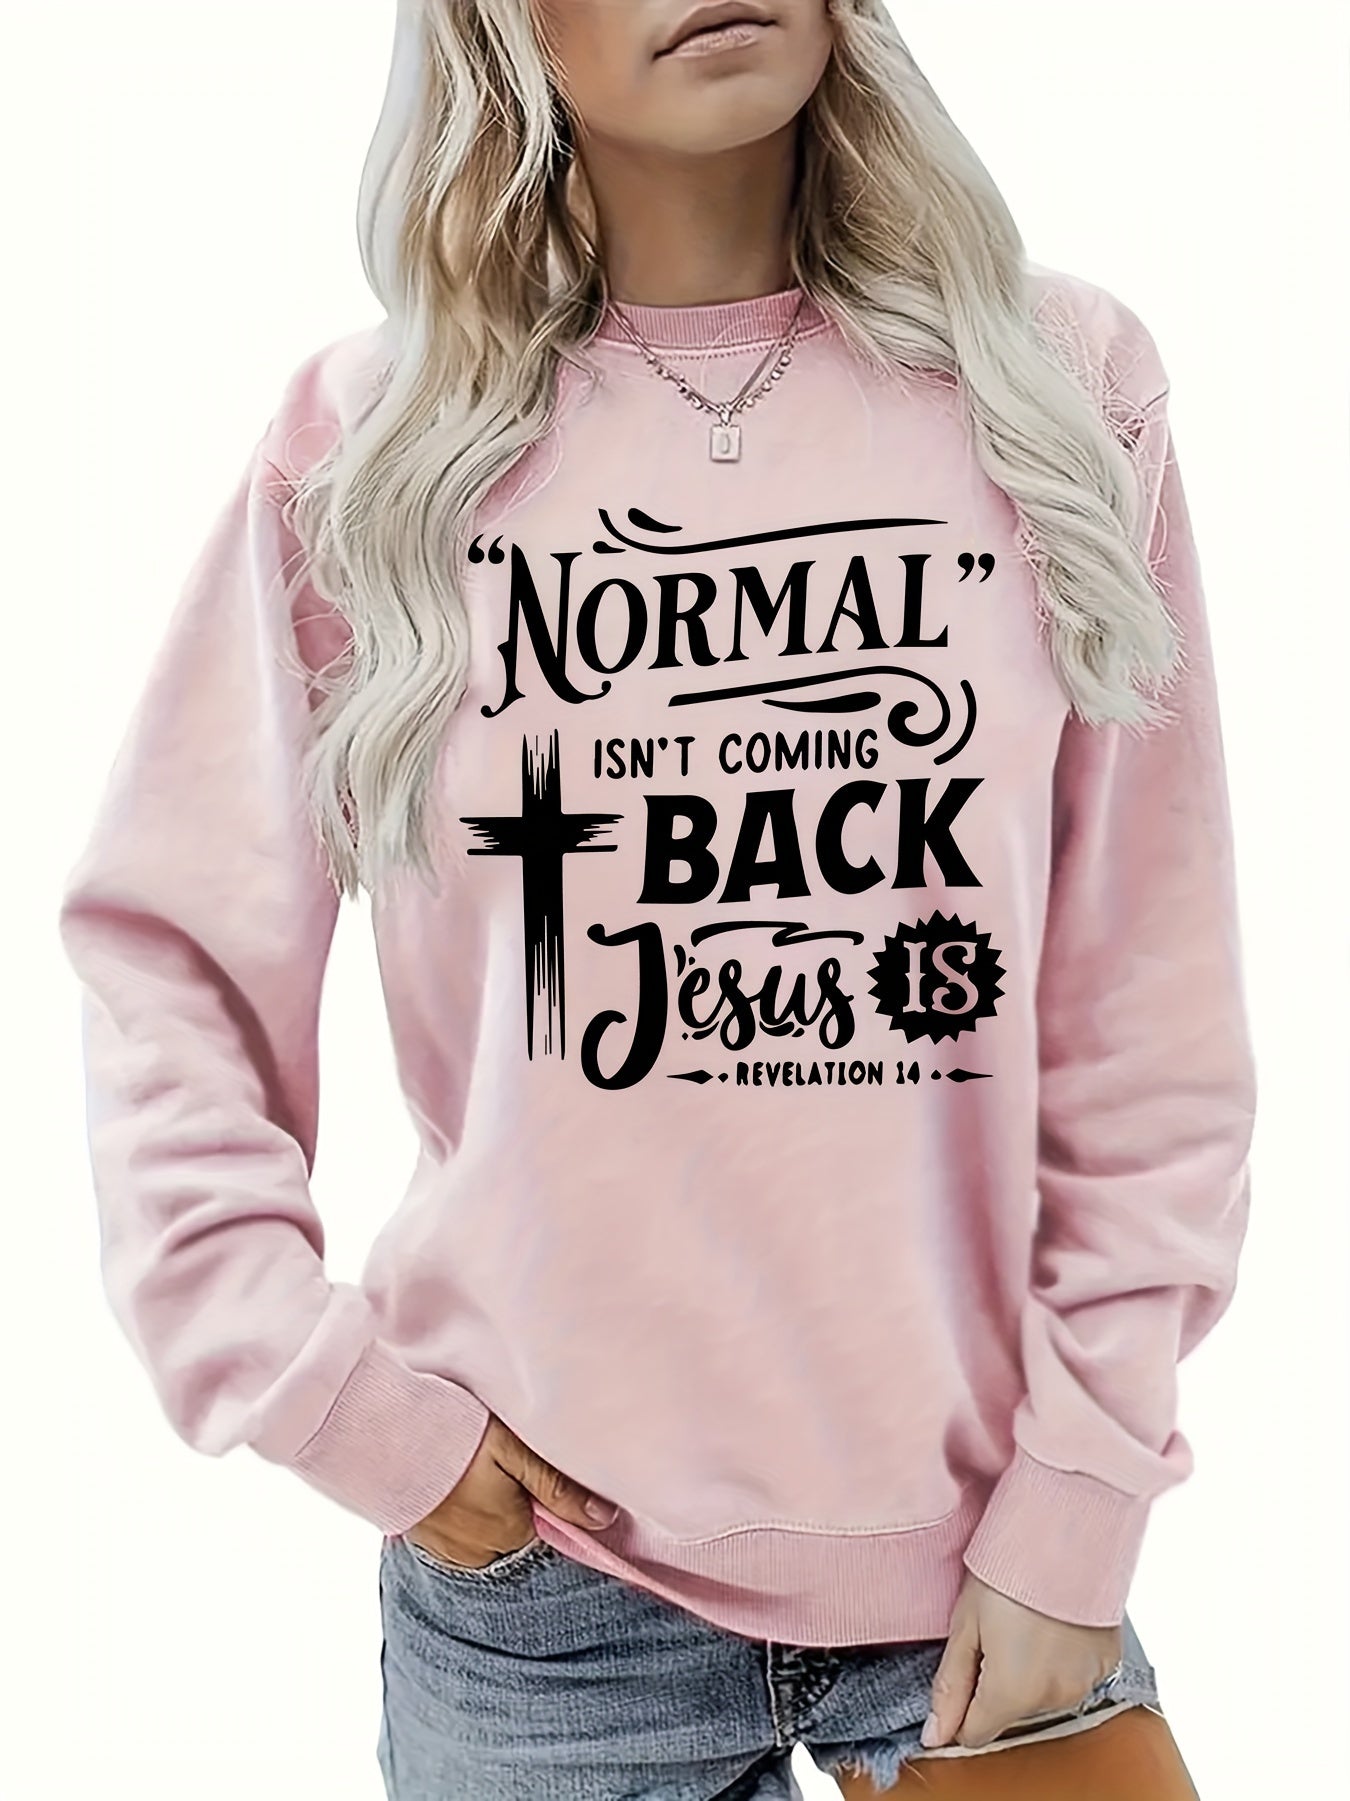 Normal Isn't Coming Back But Jesus Is Plus Size Women's Christian Pullover Sweatshirt claimedbygoddesigns